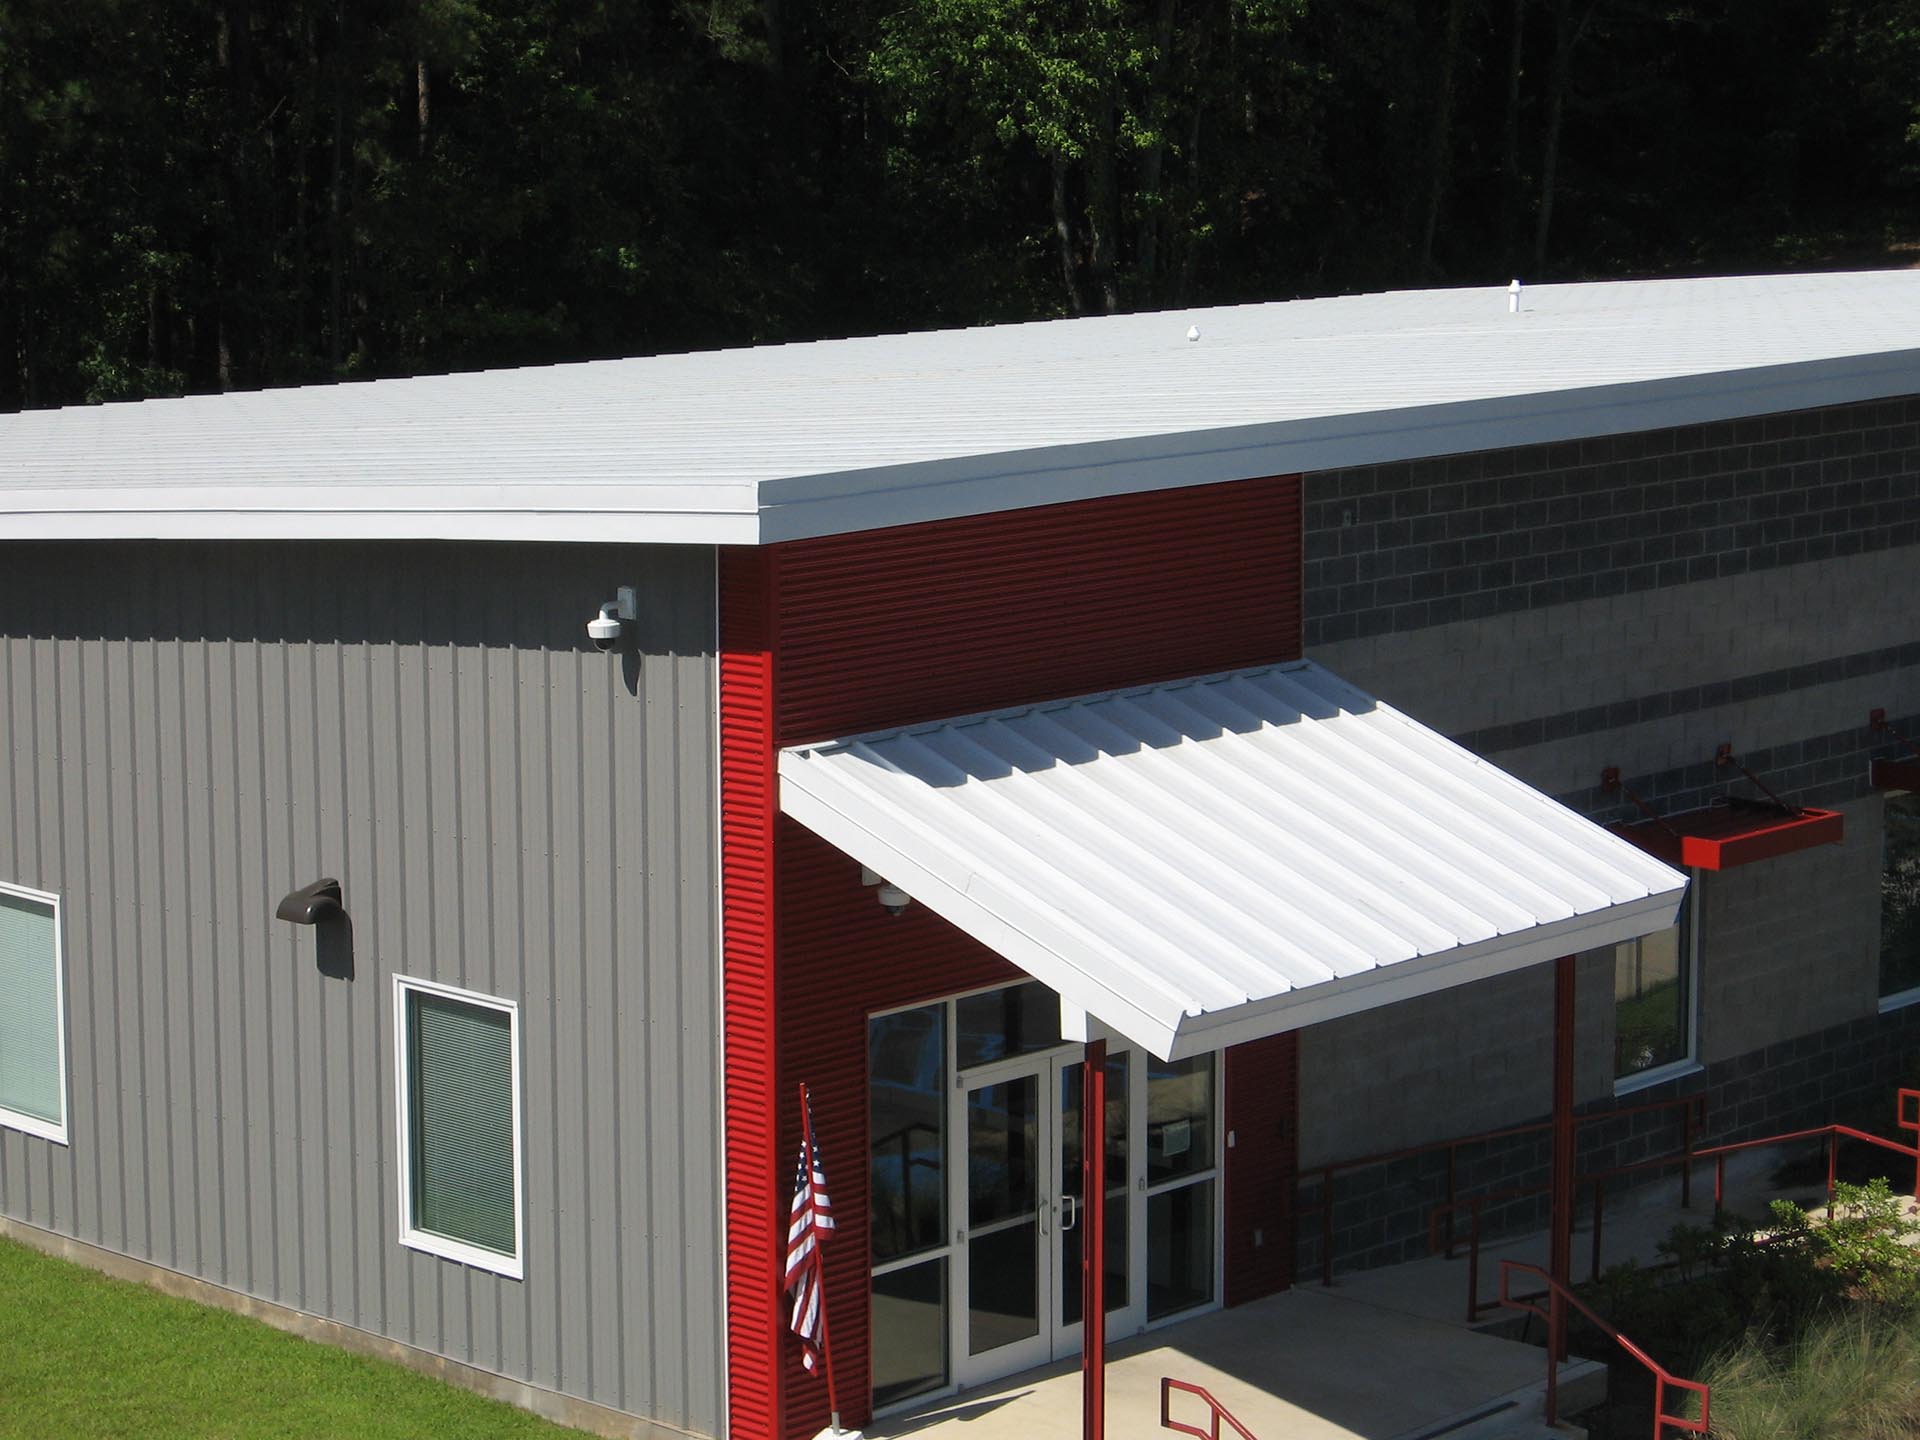 Architects, tap into the expertise of your metal roof manufacturer